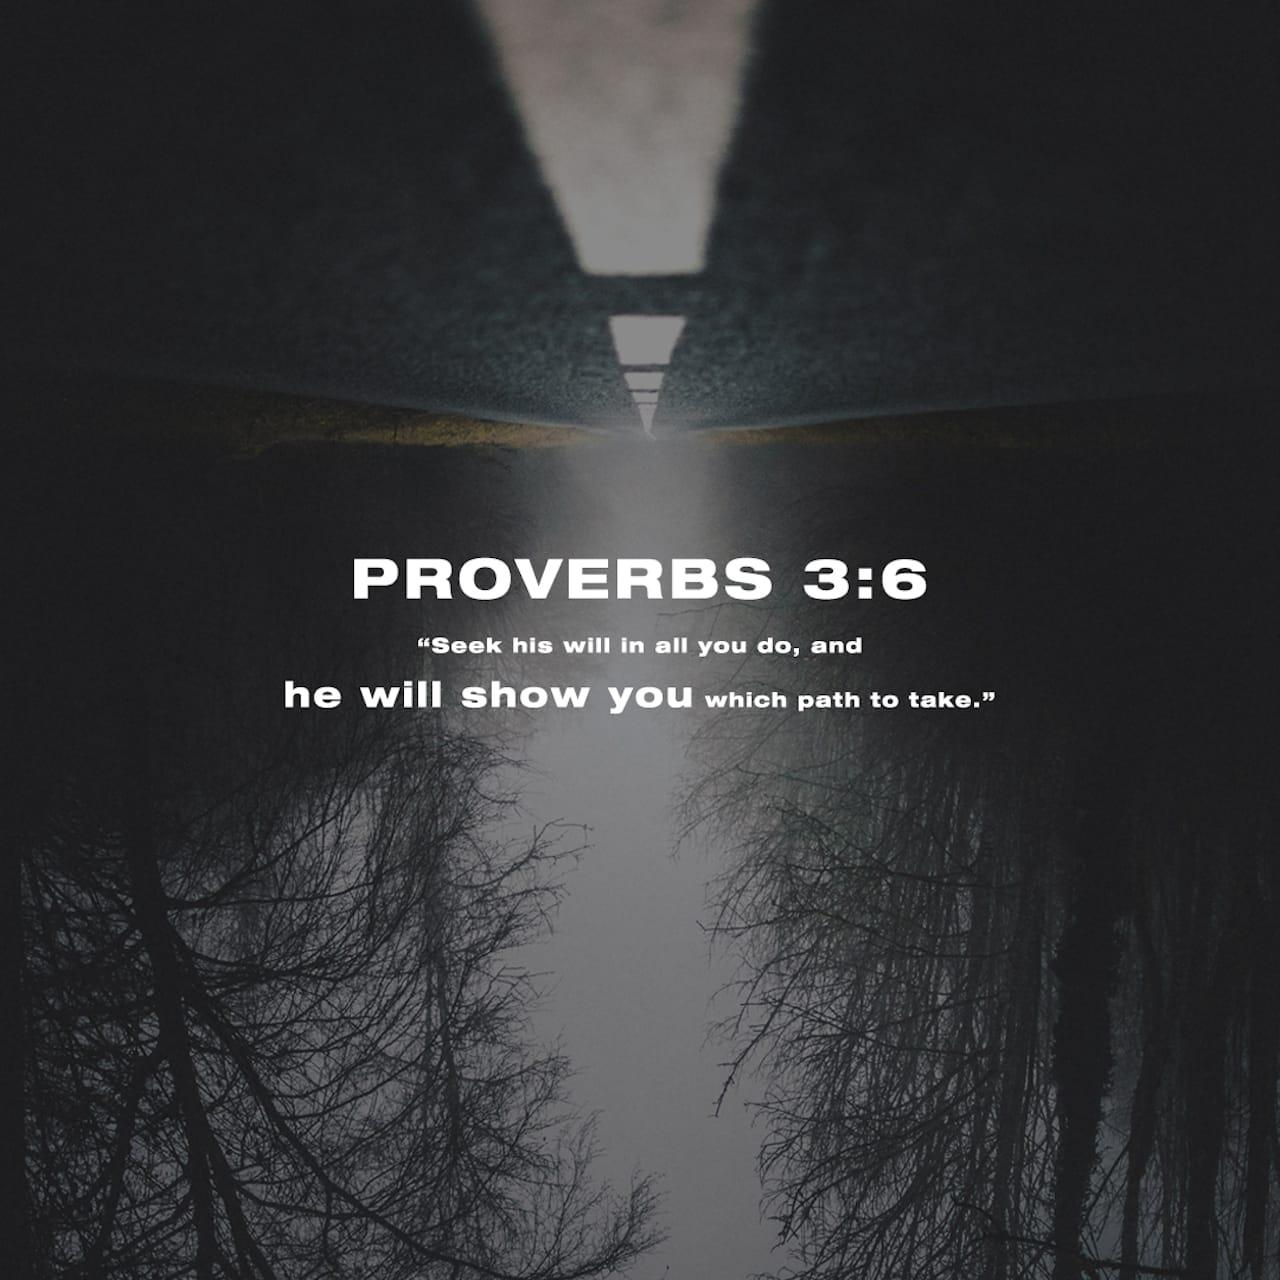 Bible Verse of the Day - day 155 - image 15579 (Proverbs 3:5-6)